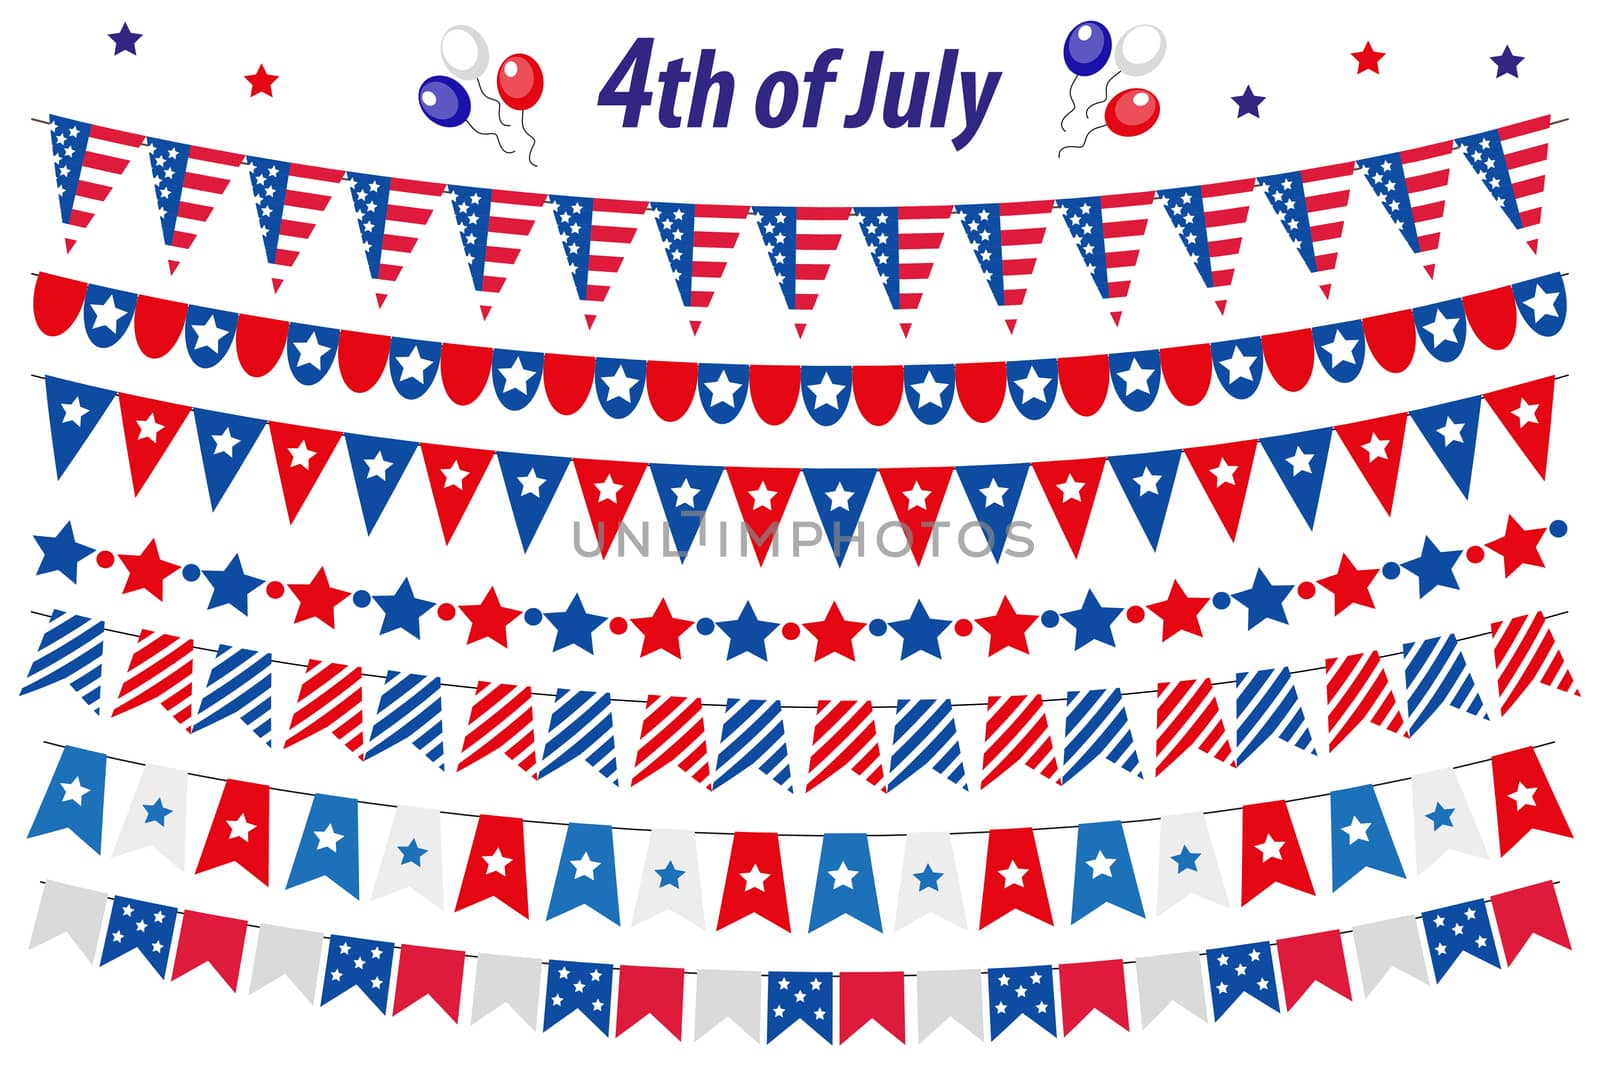 American Independence Day, celebration in USA, set bunting, flags, garland. Collection of decorative elements for July 4th national holiday. illustration, clip art